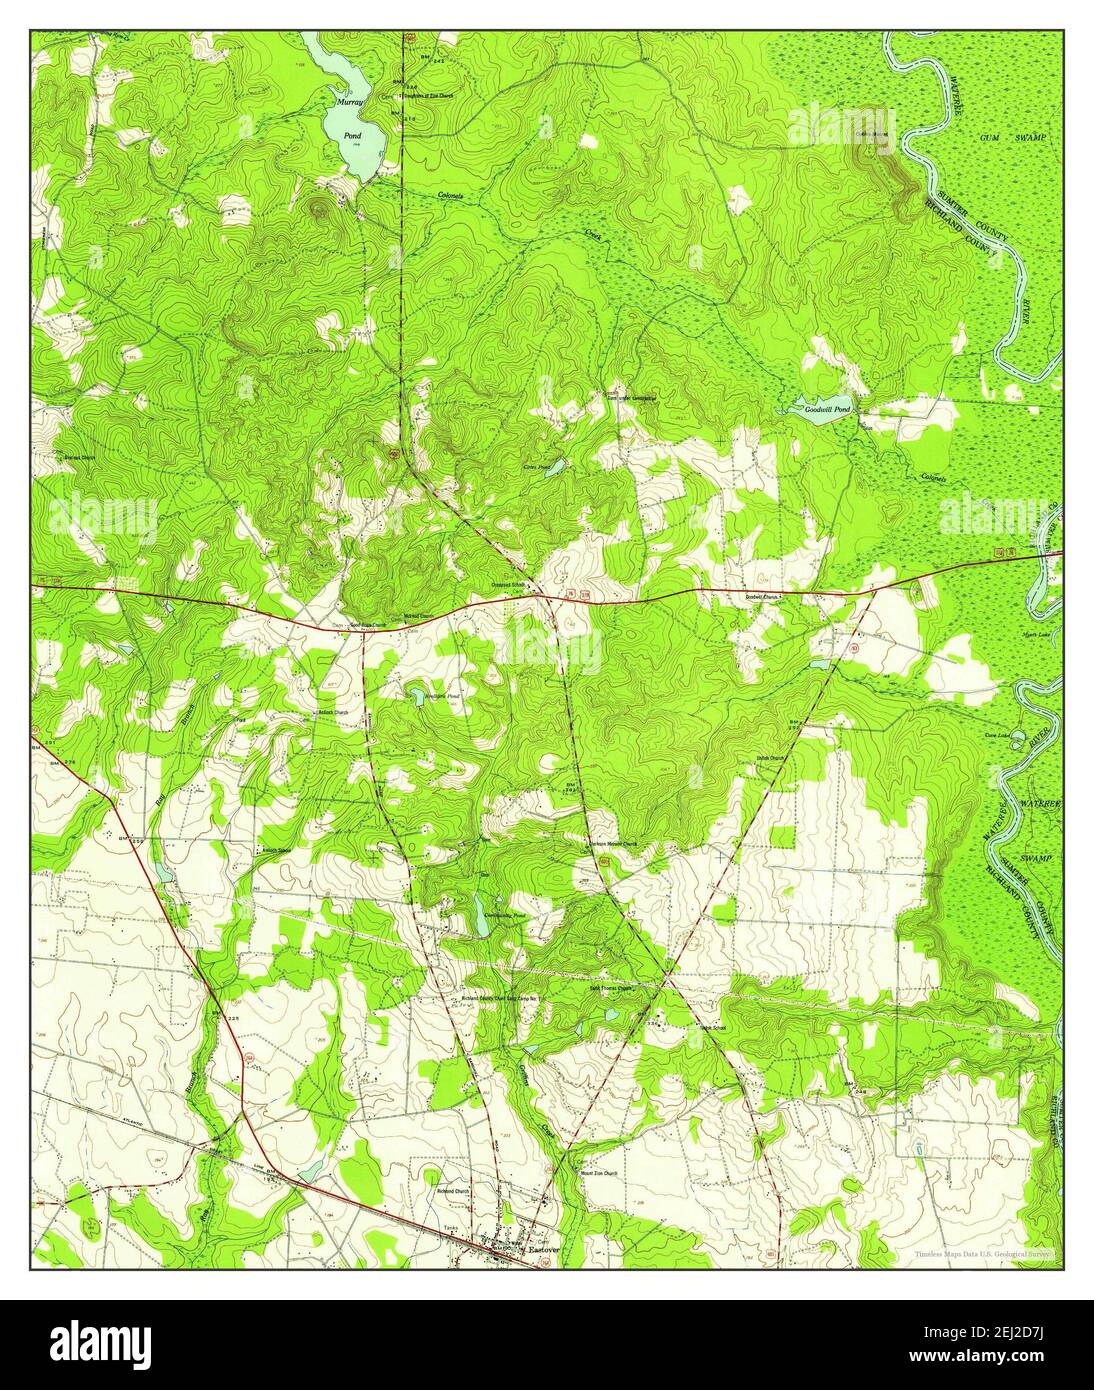 Eastover, South Carolina, map 1953, 1:24000, United States of America by Timeless Maps, data U.S. Geological Survey Stock Photo